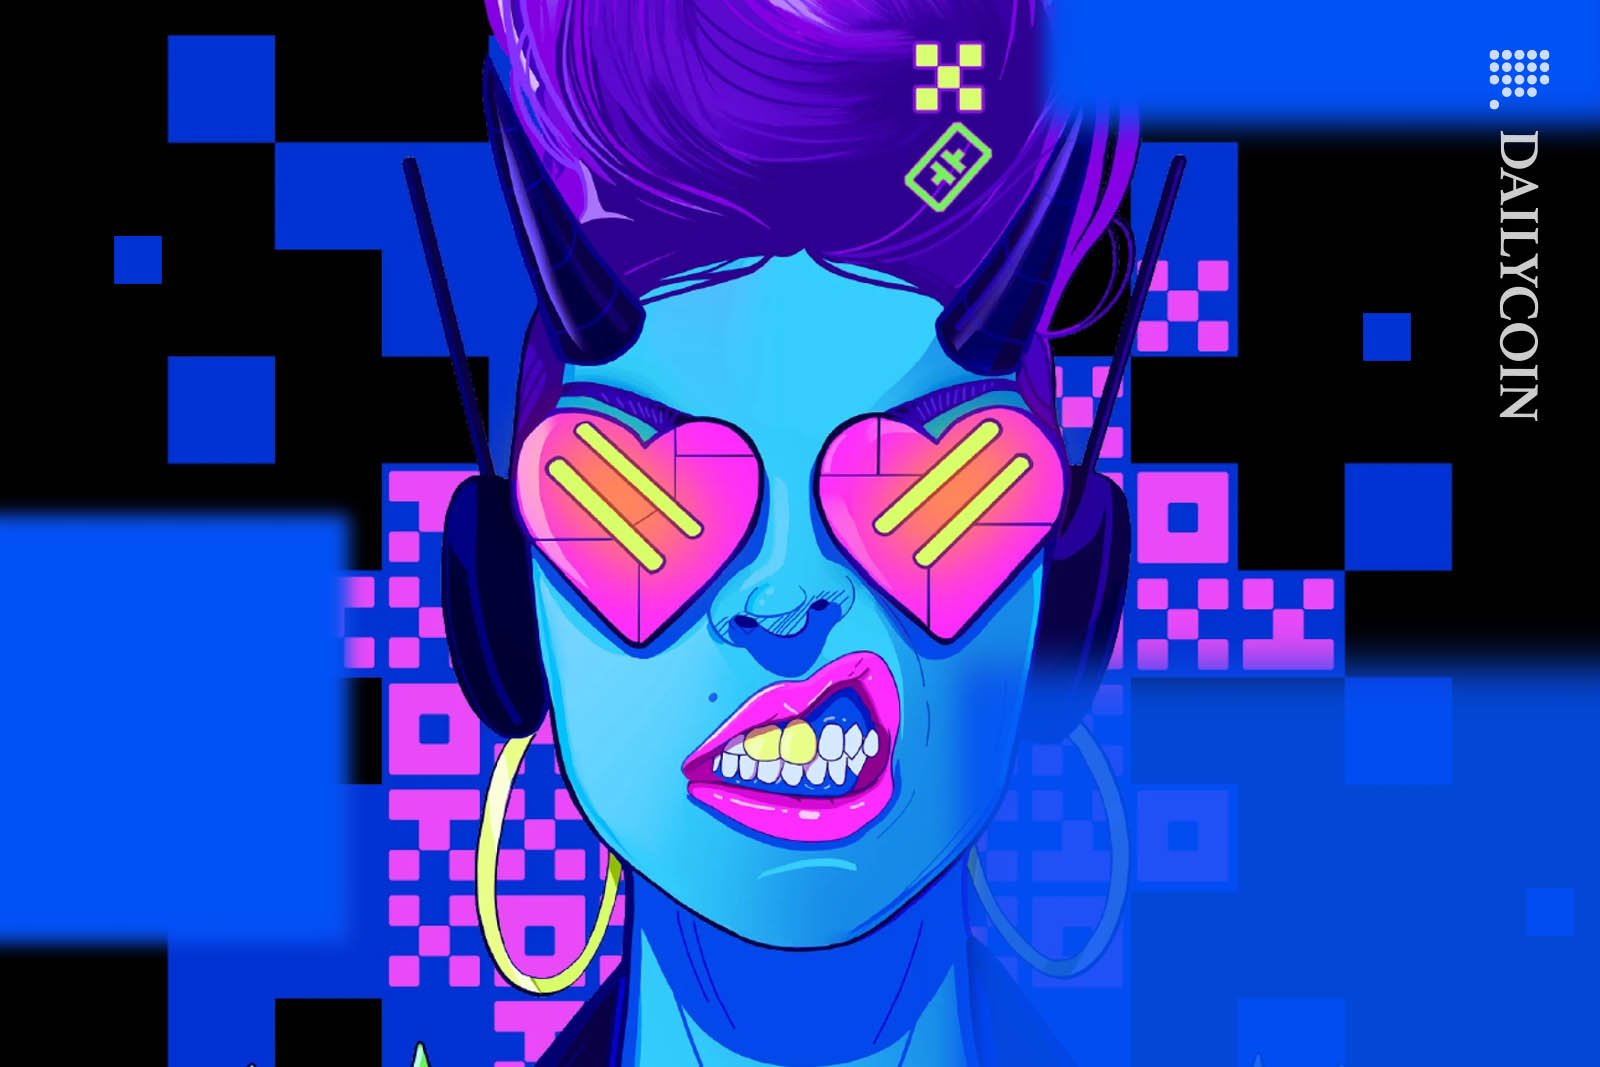 Girl portrait in colorful cyberpunk style with OKX written in pink on the background.